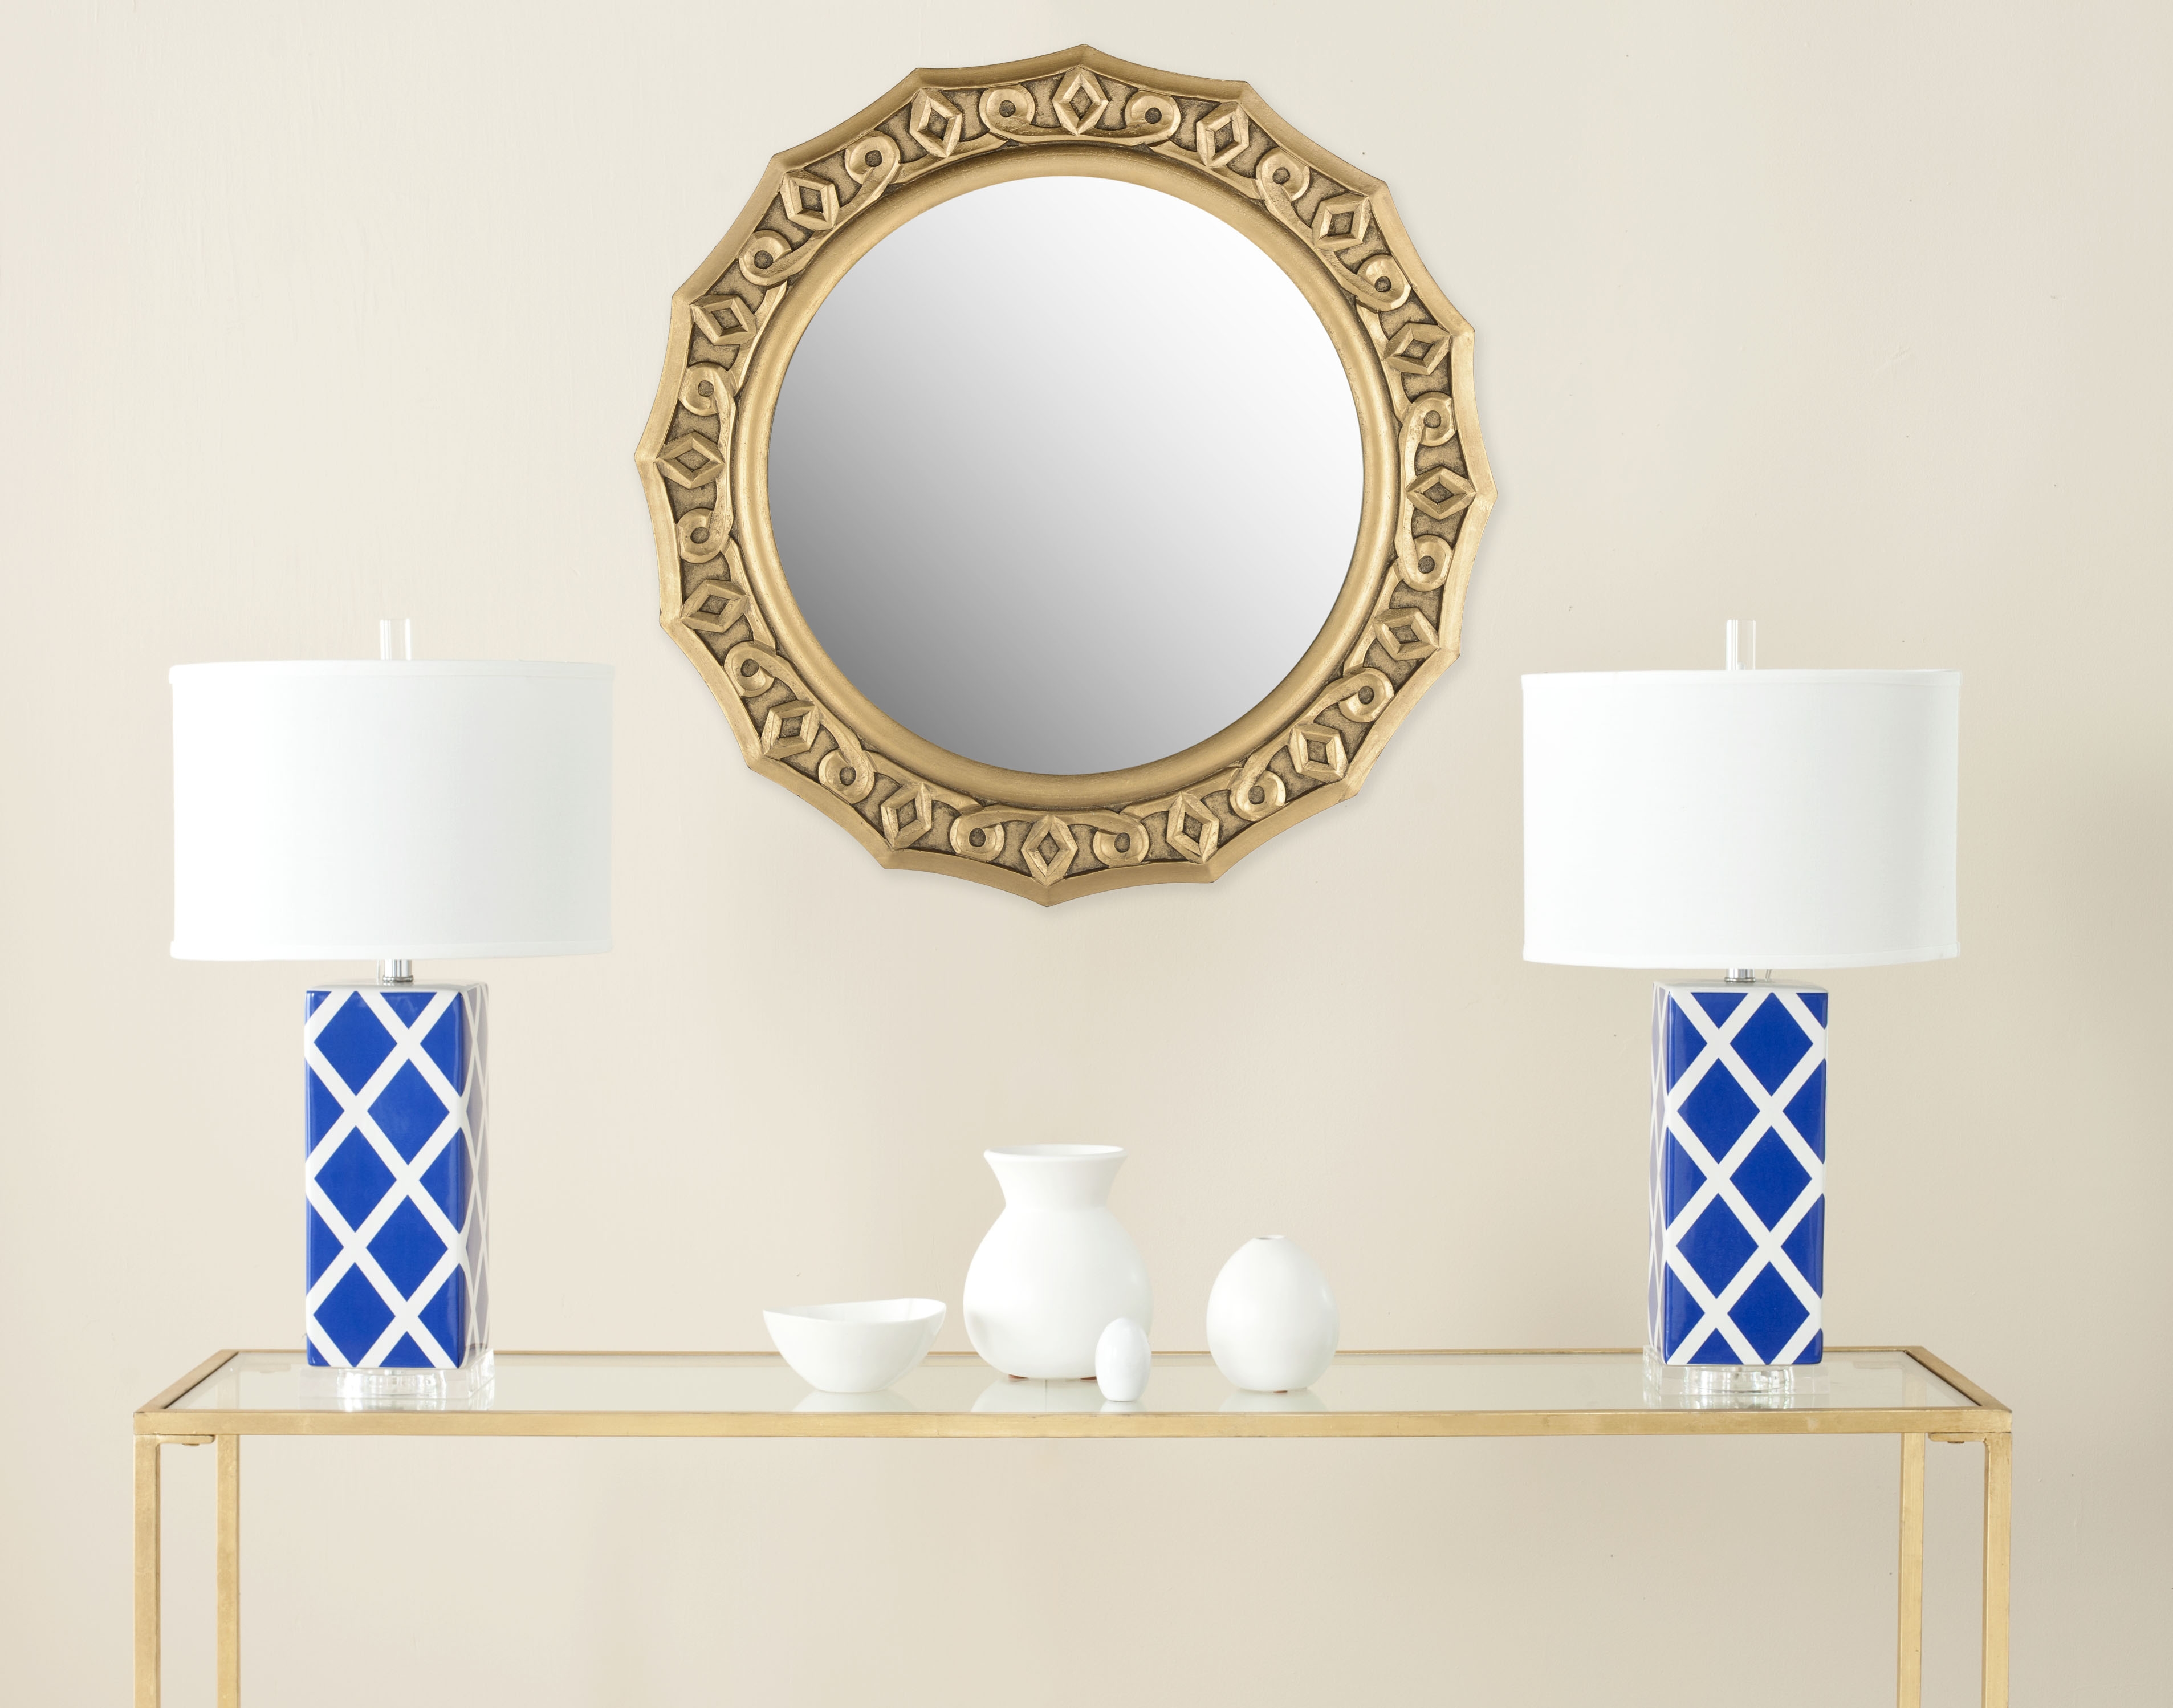 Gossamer Lace Mirror - Gold - Arlo Home - Image 2